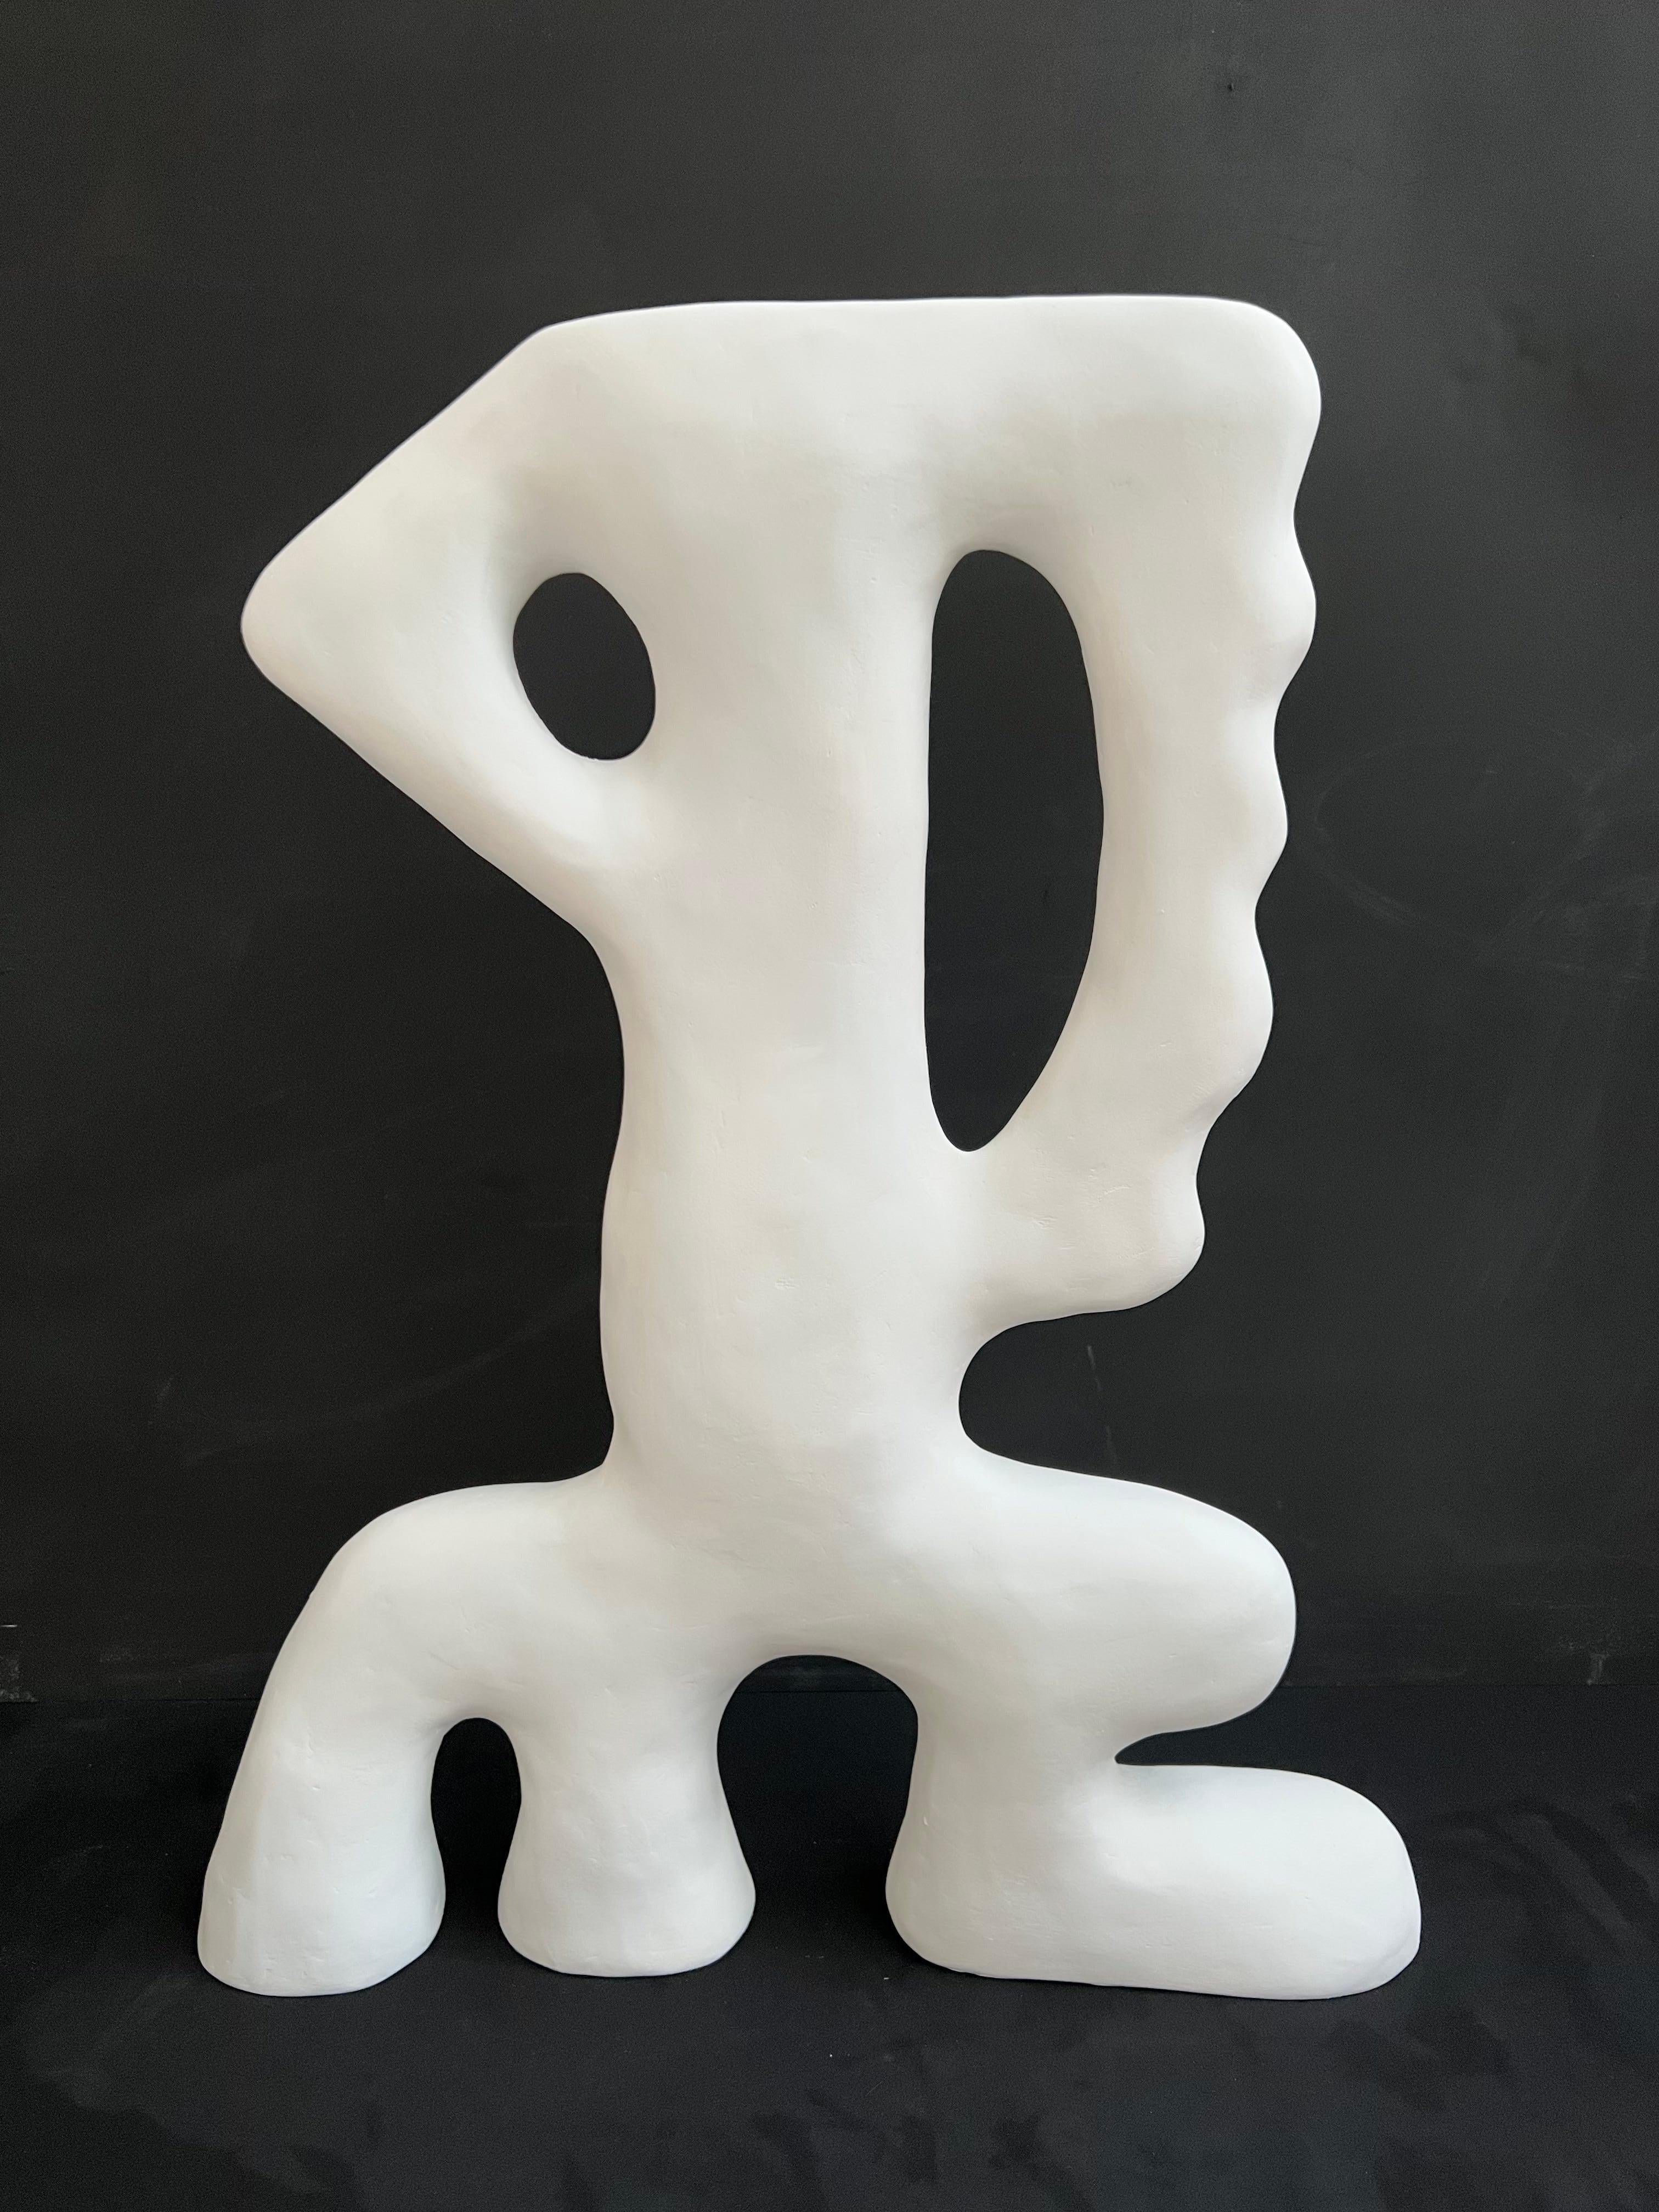 
A one-of-a-kind abstract sculpture in white, from the series 'White Symphony,'  handcrafted in full bodied gypsum reinforced with inner layers of fibreglass matting. The creative process  involves multiple stages from crafting, sanding, filling and